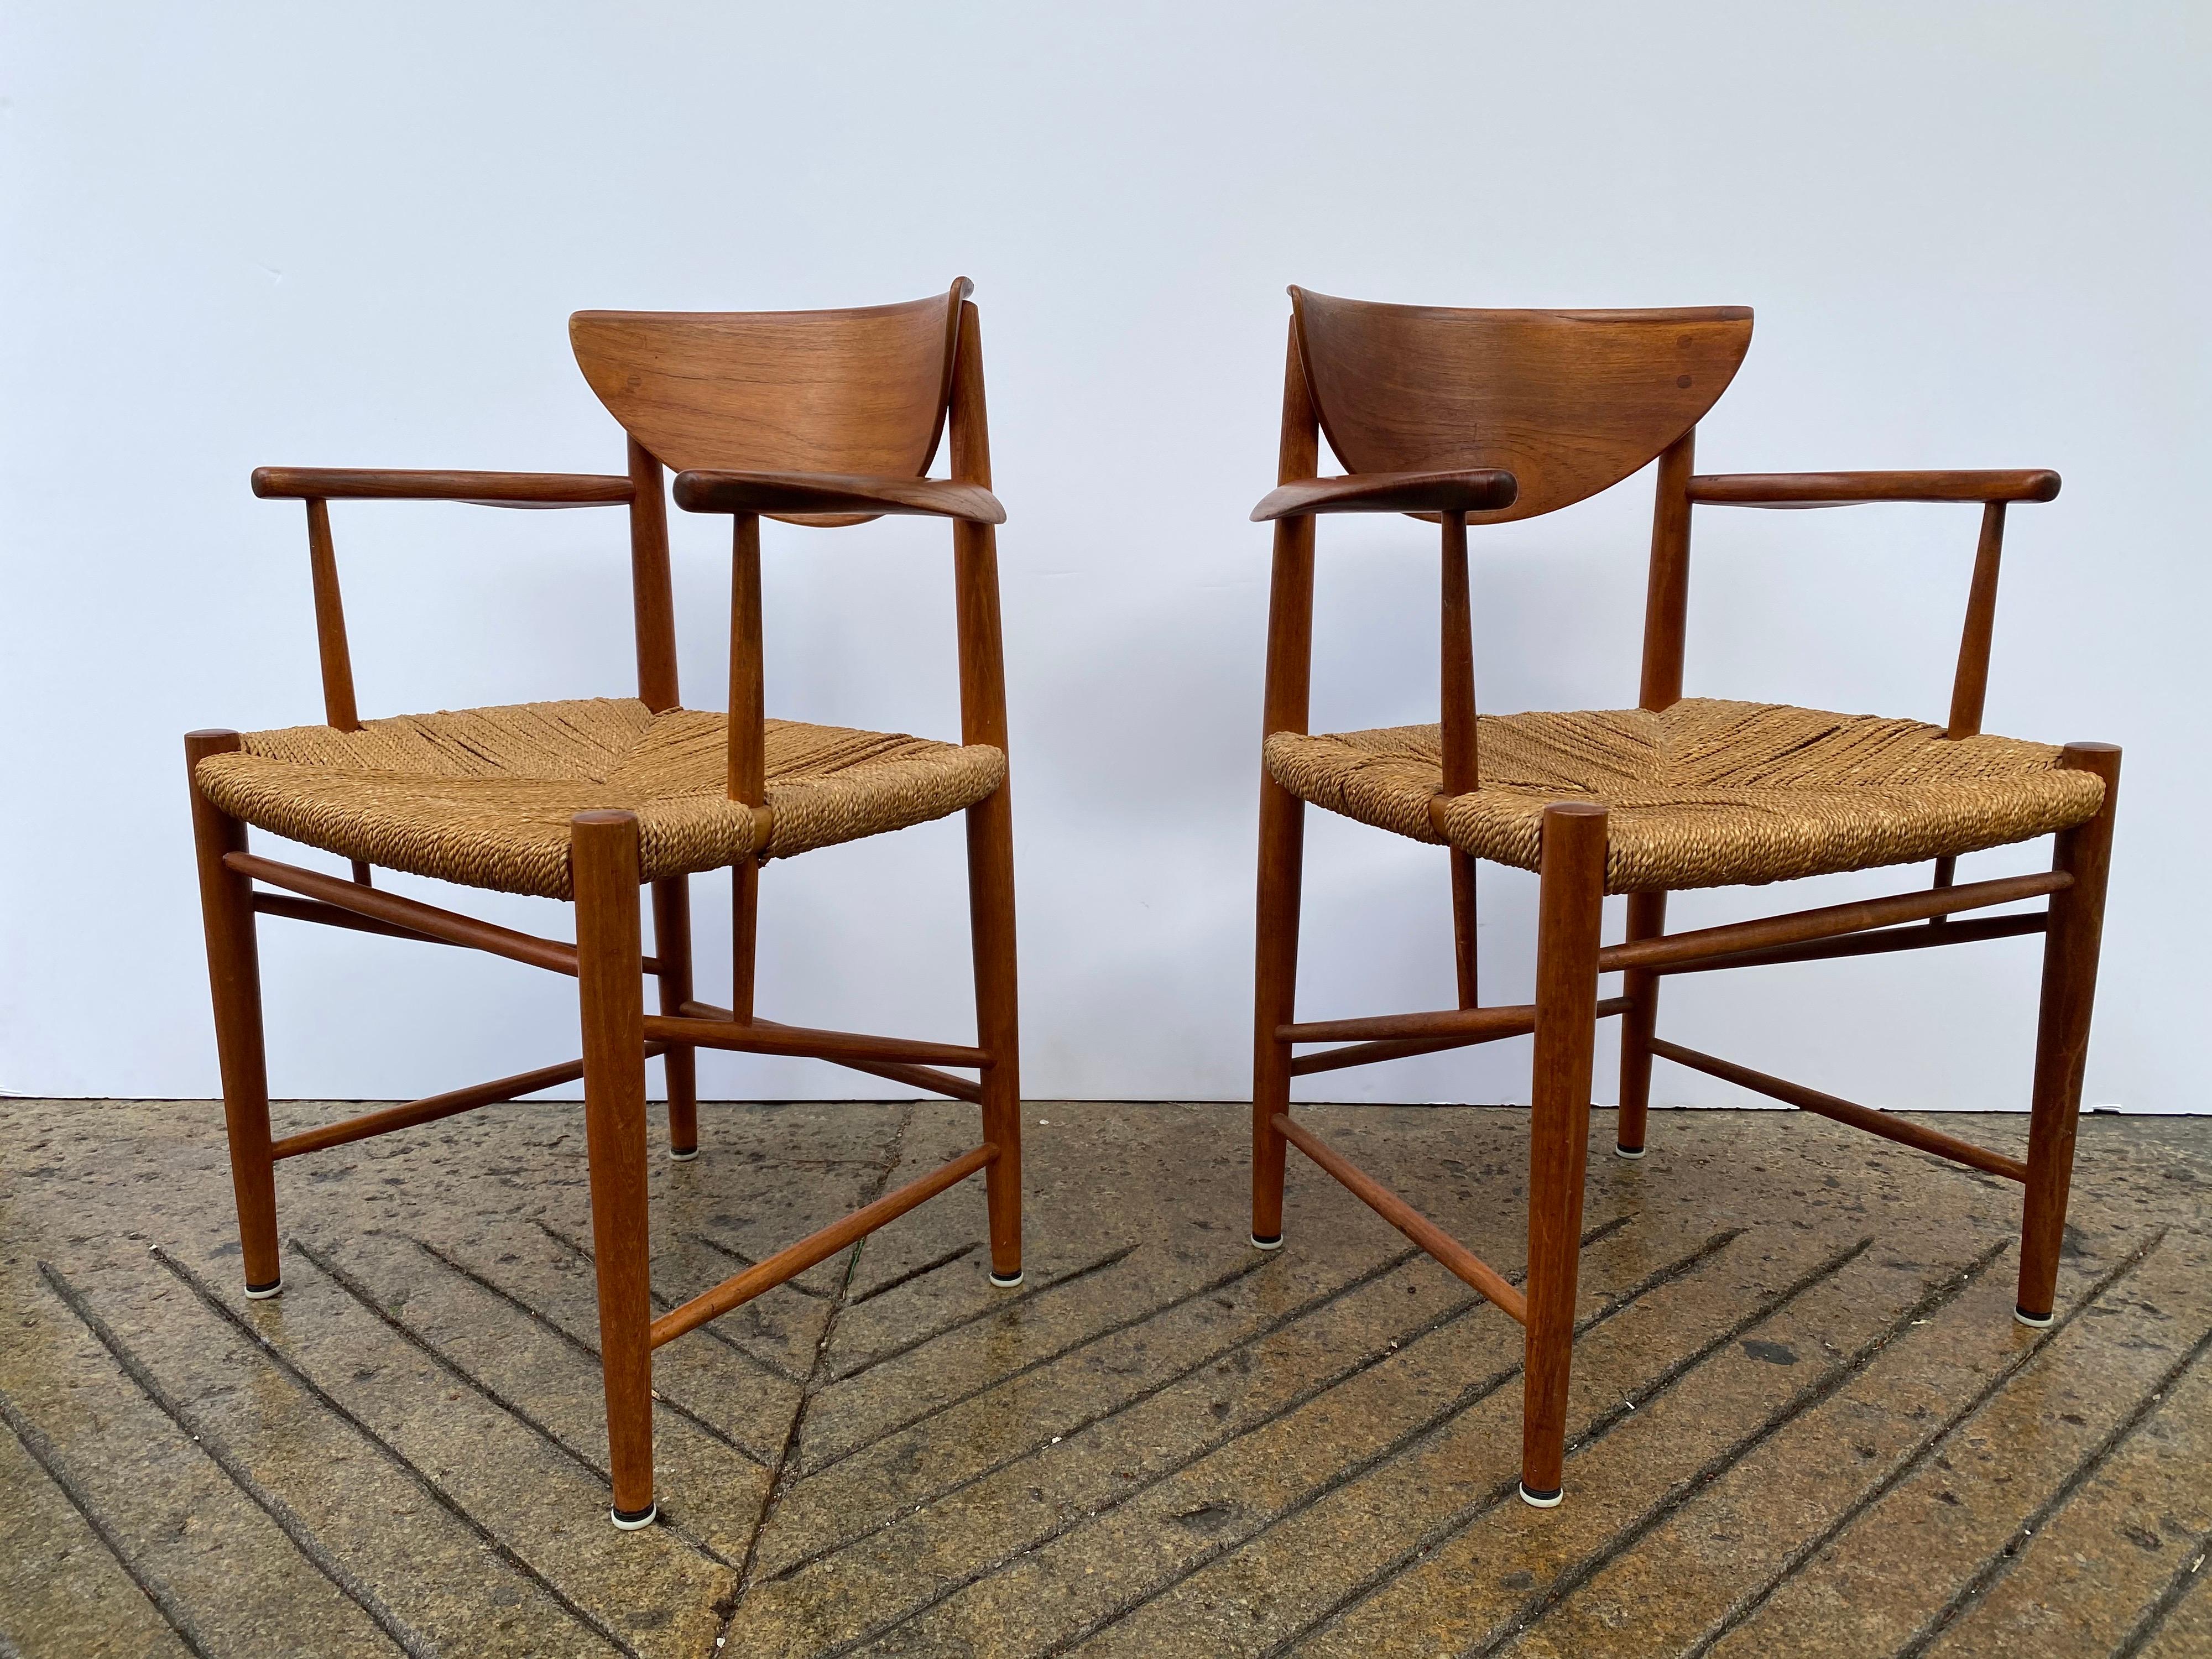 Pair of Peter Hvidt armchairs in solid teak. Beautiful chairs, very original, one seat shows a little more wear than the other. Wood is very nice! Chairs are very solid. One piece re-glued on back of seat back as seen in photo.